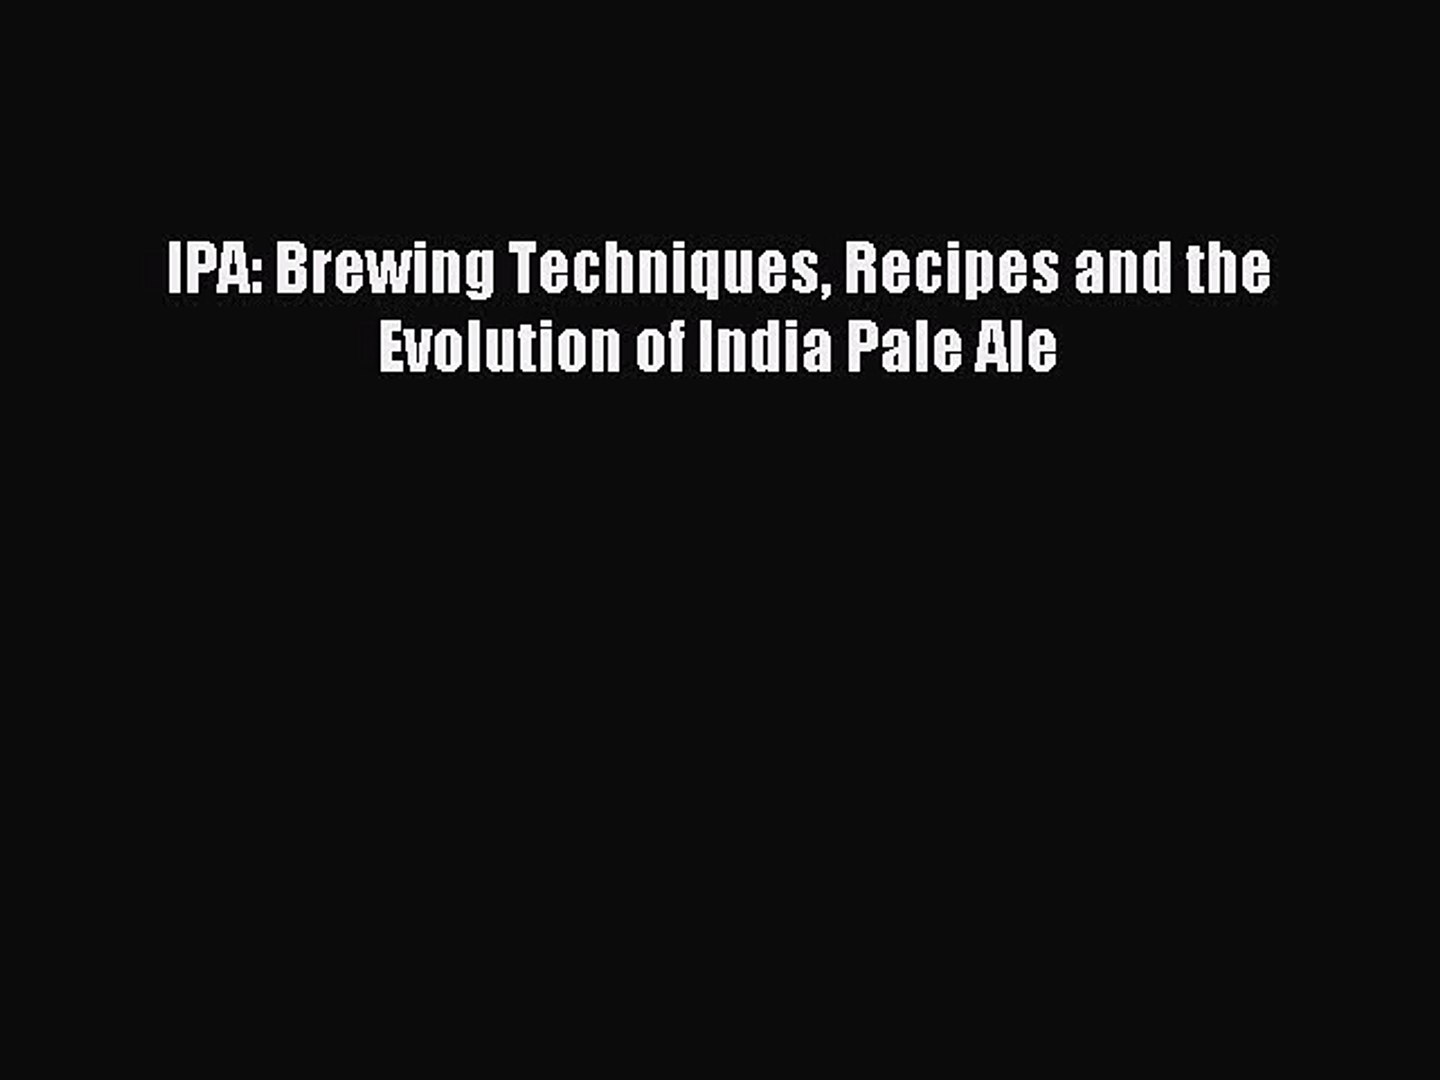 Download IPA: Brewing Techniques Recipes and the Evolution of India Pale Ale PDF Free